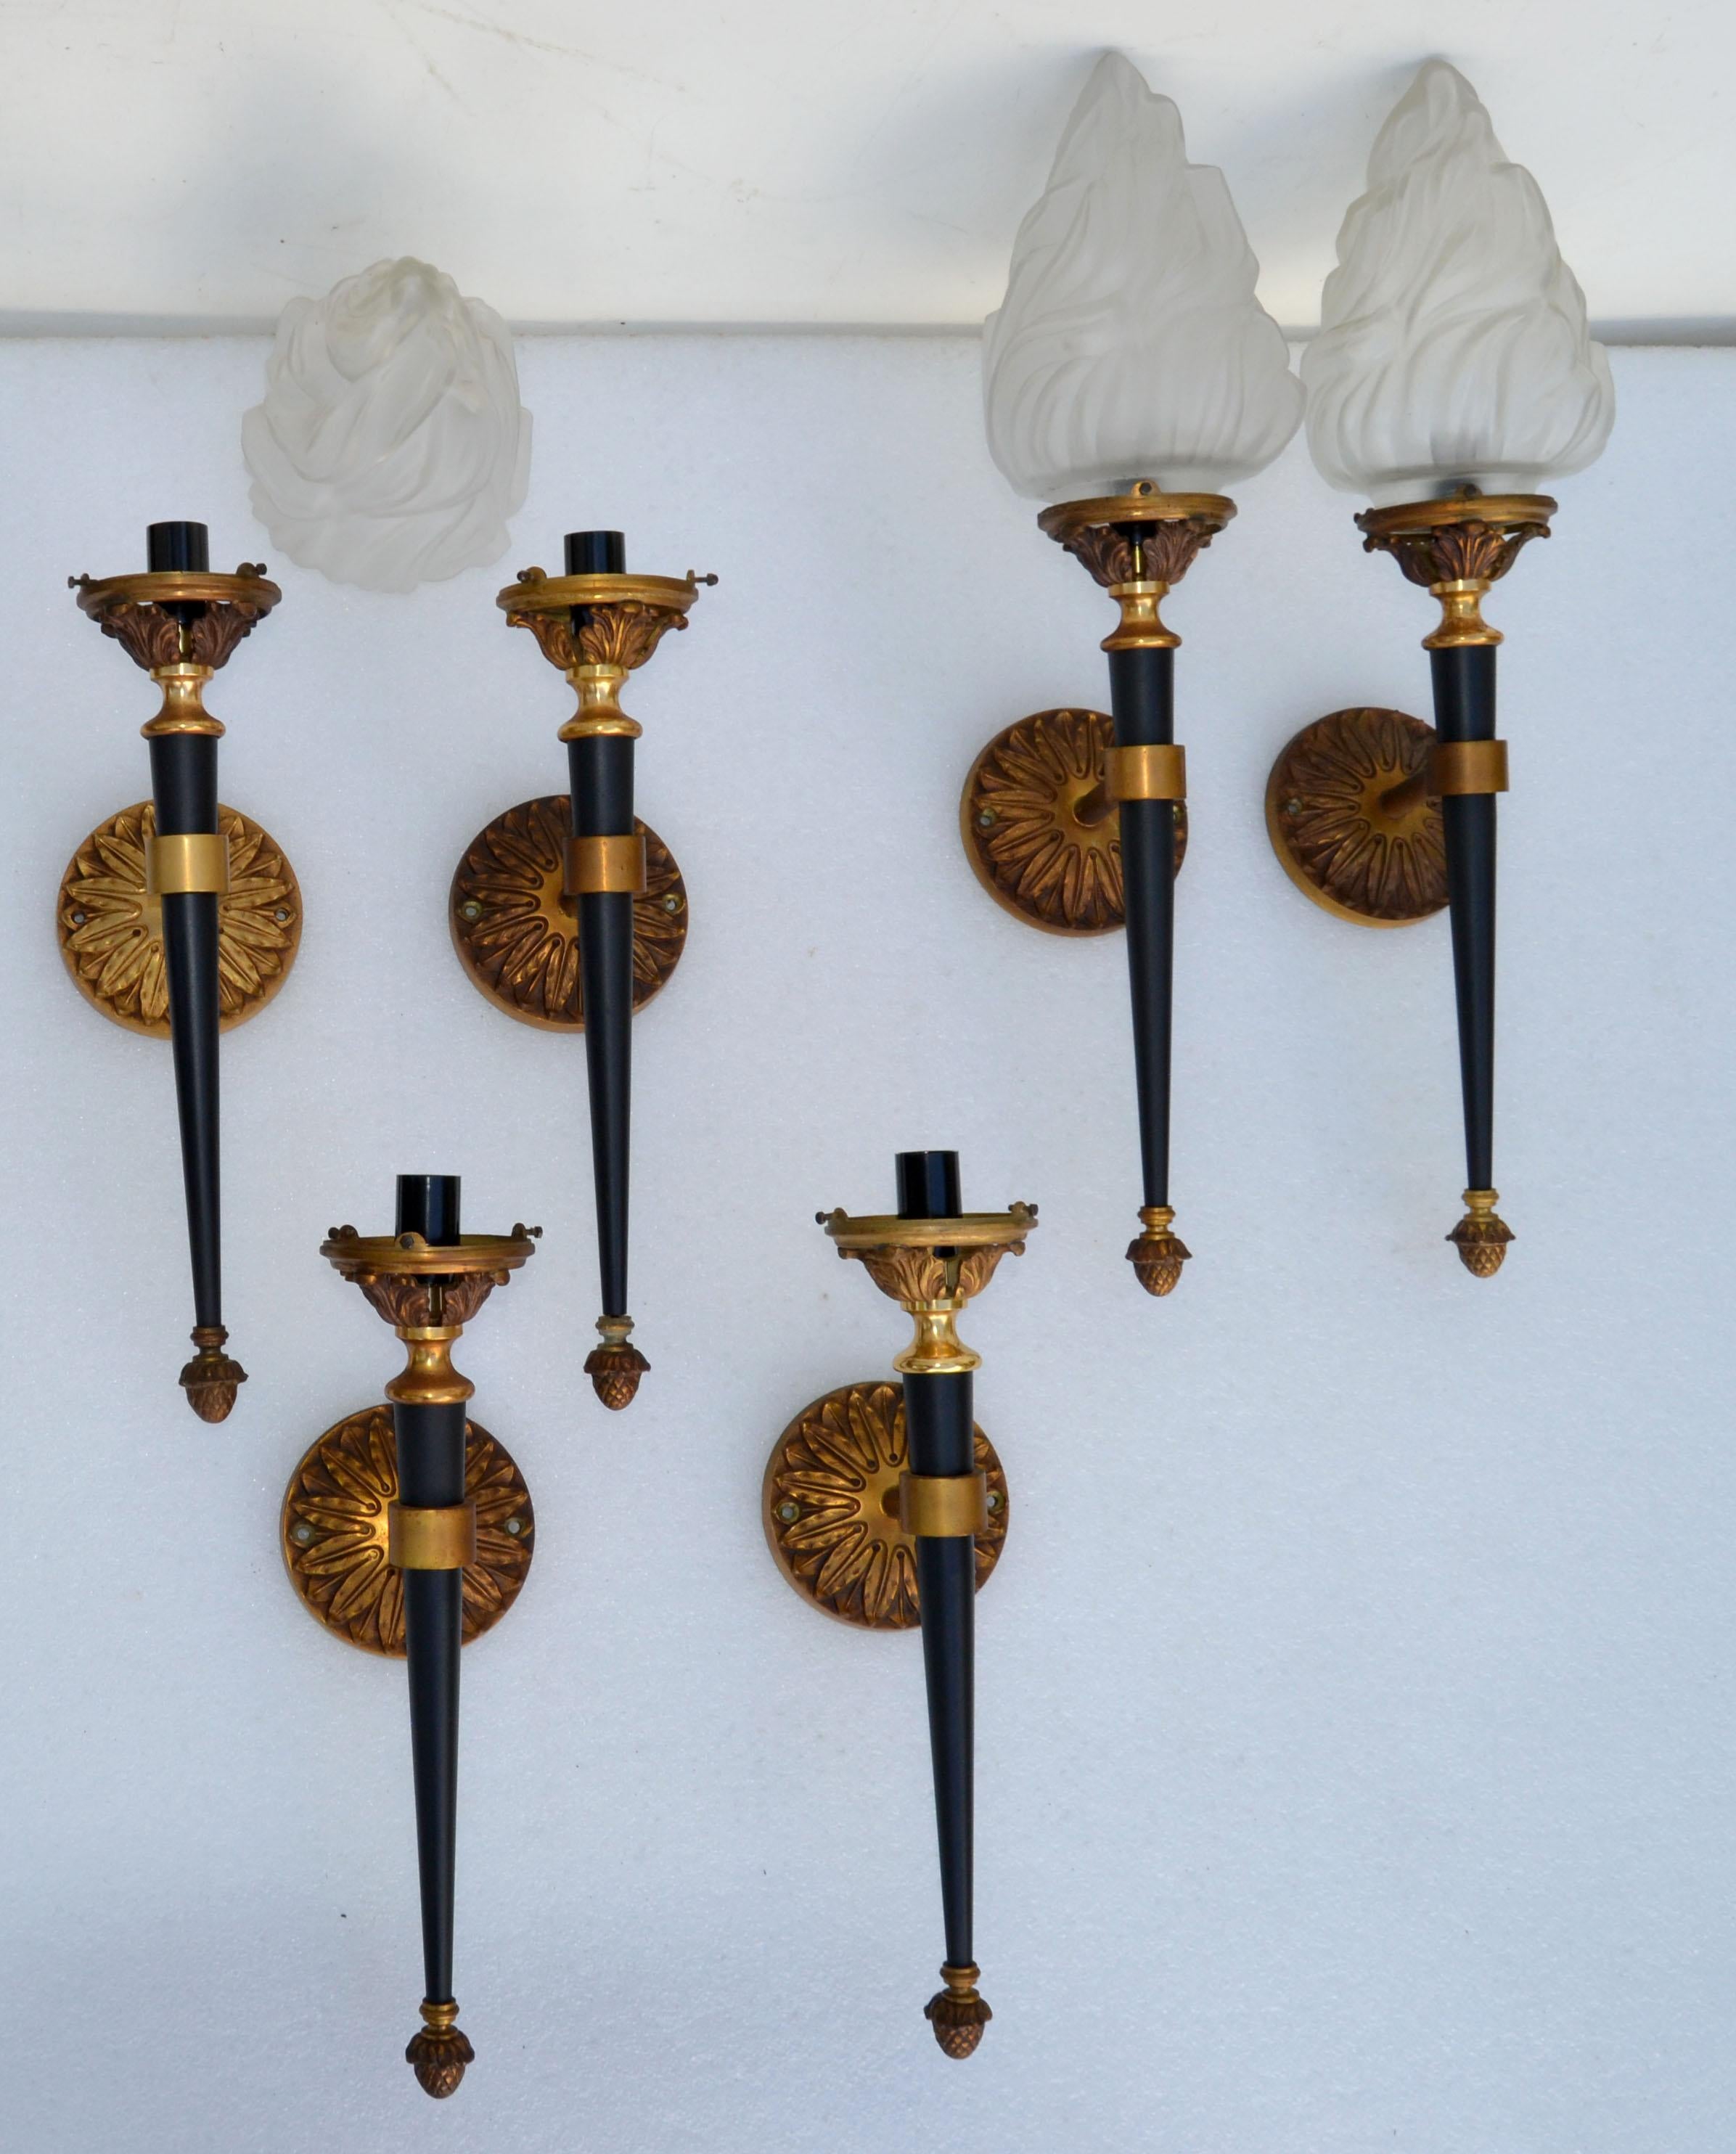 Brass Maison Jansen Sconces Solid Bronze & Blown Glass Flame Shade France 1950, Pair For Sale